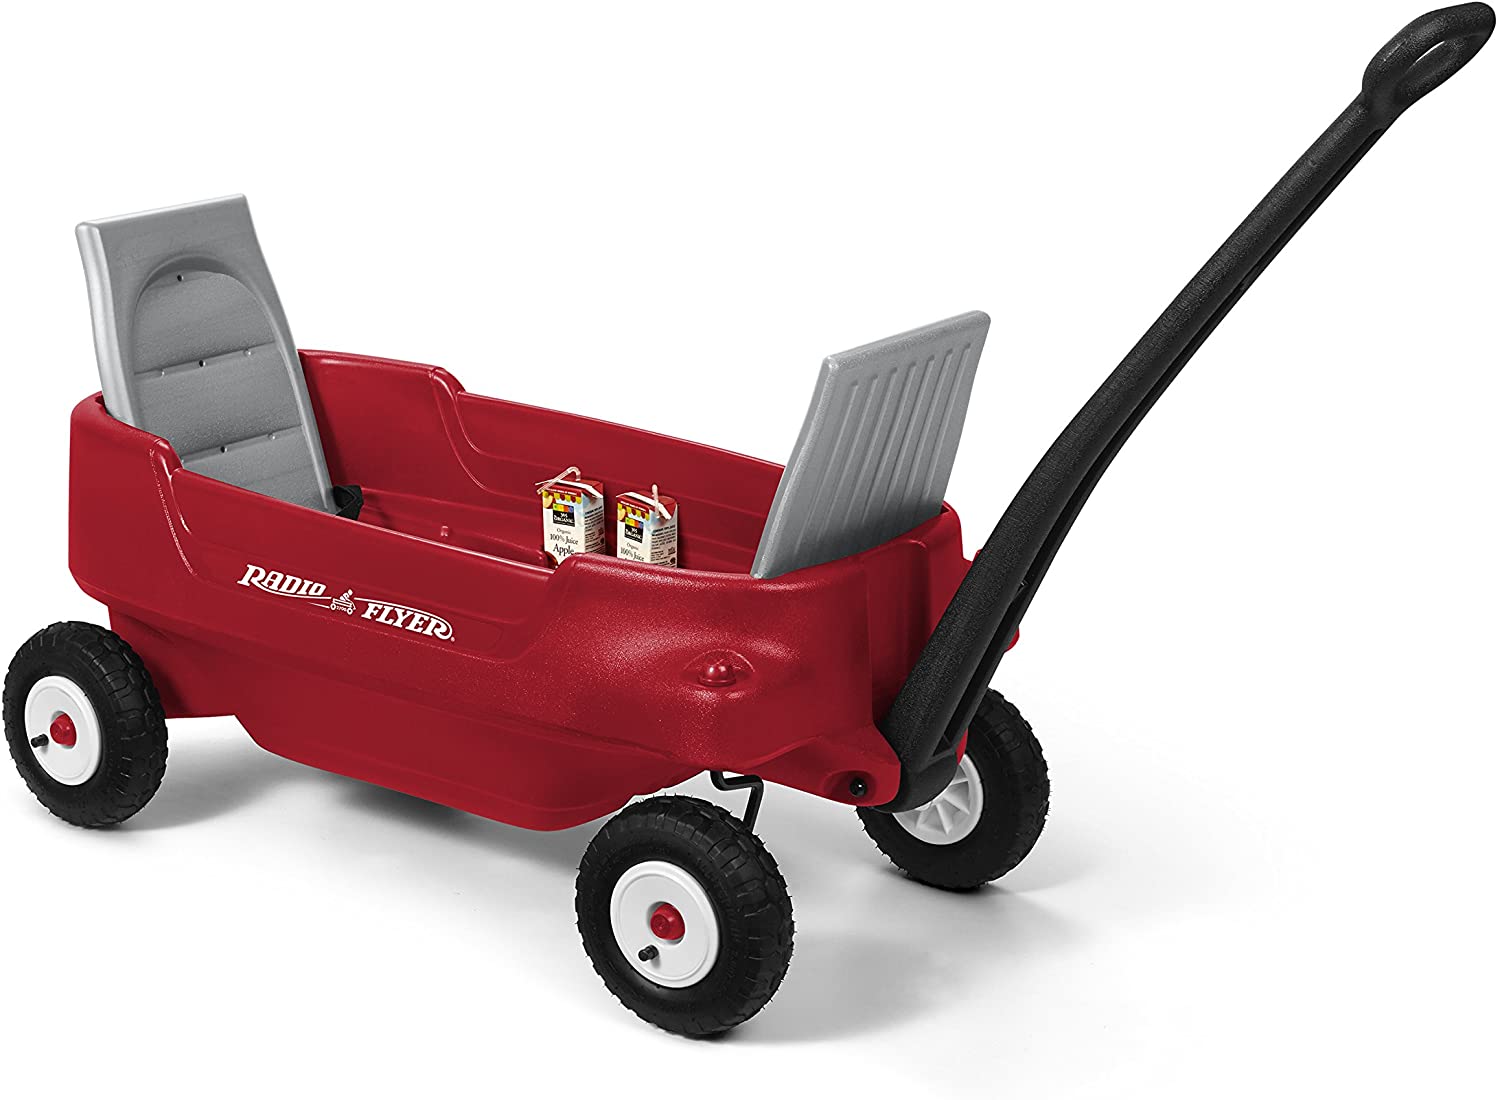 wagons for kids